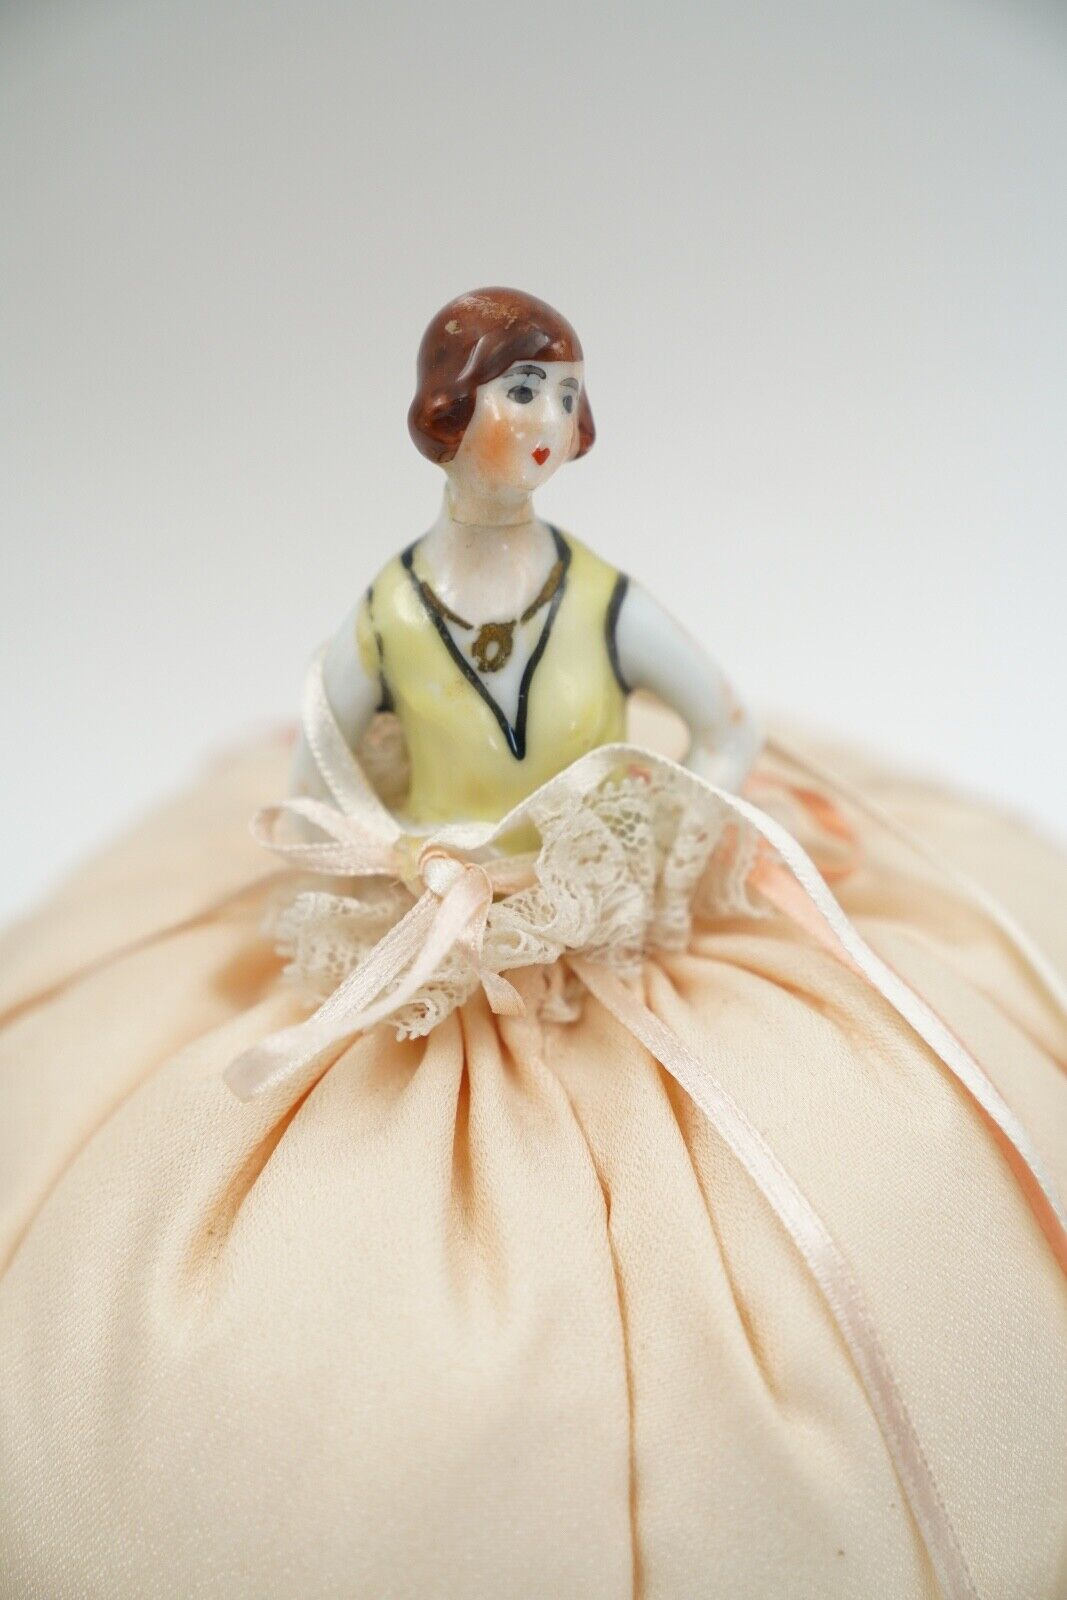 Vintage Porcelain Lady with Hands on Hips Satin Lace Pincushion Half Doll Figure